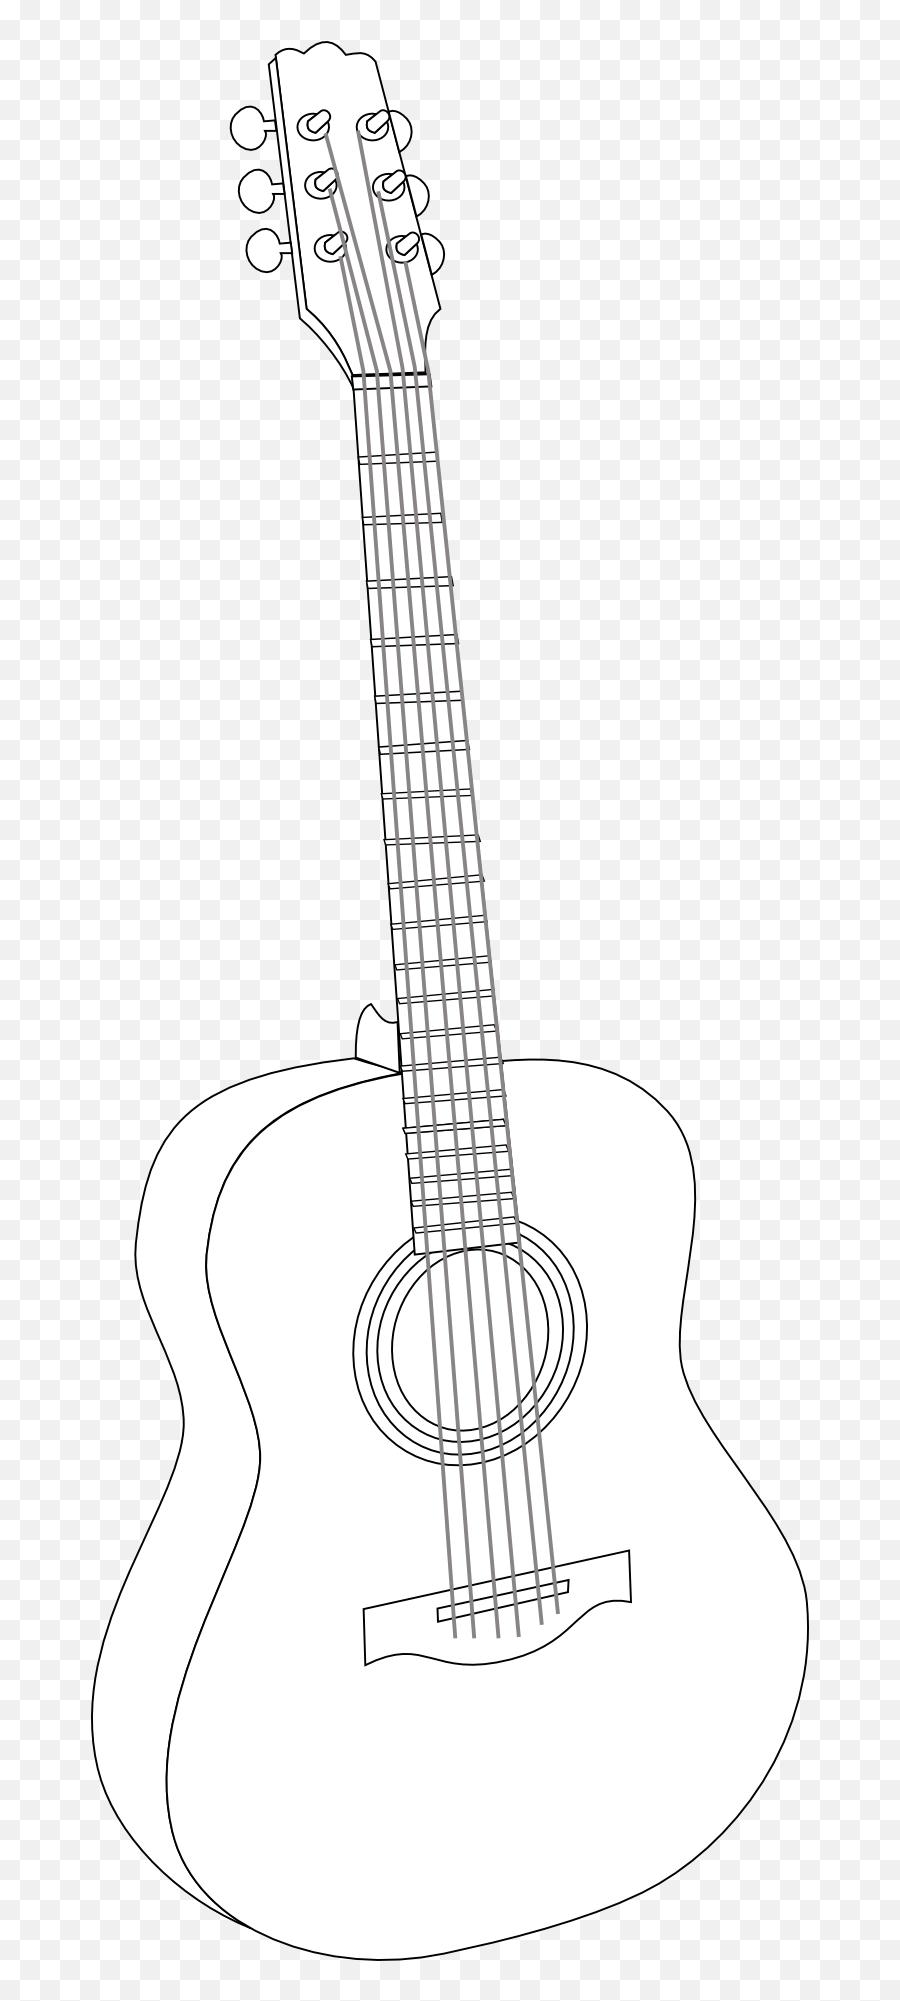 Black And White Acoustic Guitar Clipart - Black And White Clipart Acoustic Guitar Art Emoji,Guitar Clipart